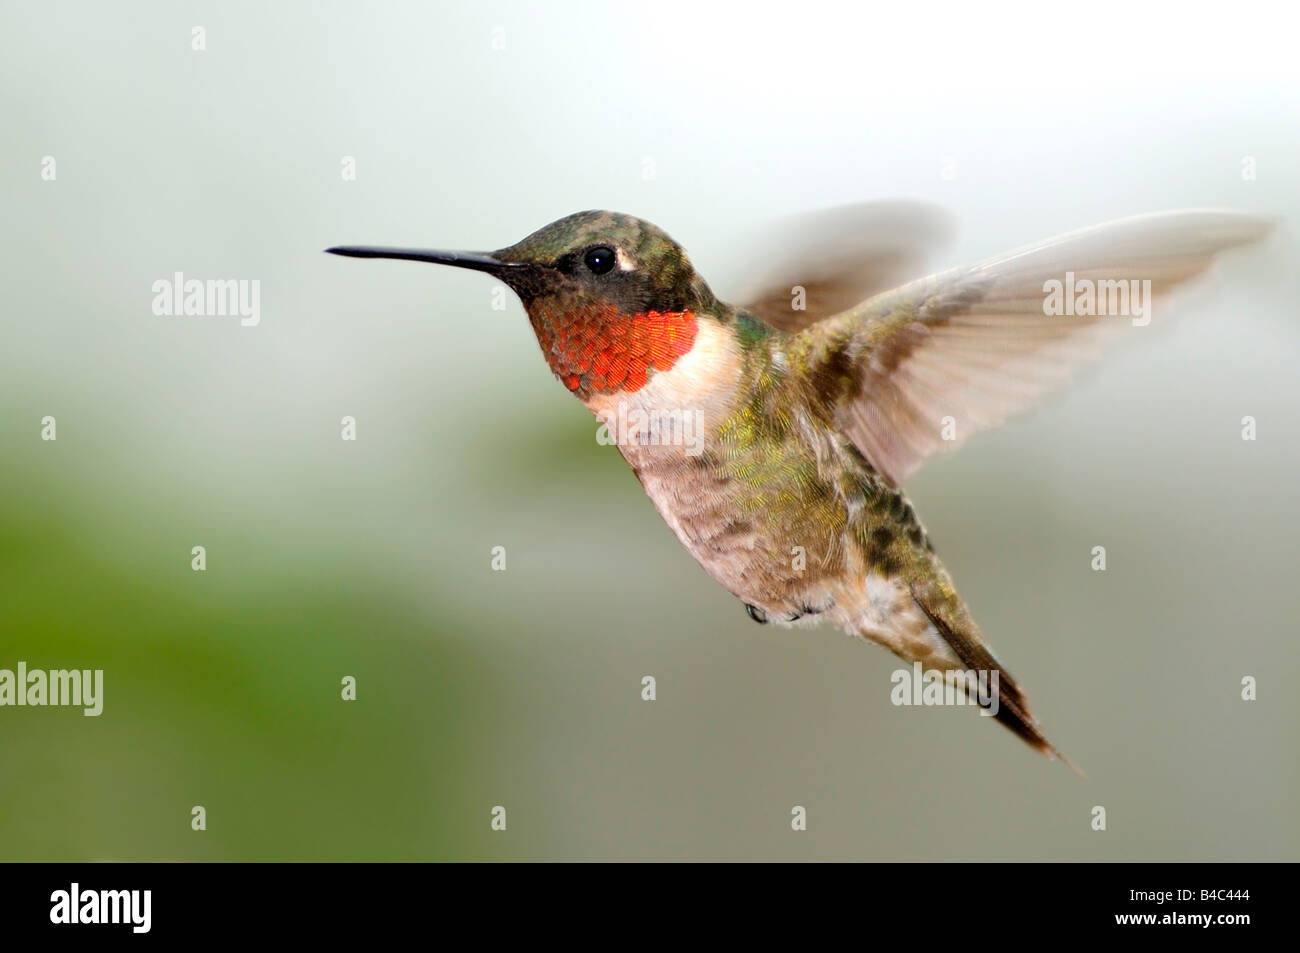 A male Ruby throated Hummingbird, Archilochus colubris, hovers and dispays his red gorget. Oklahoma, USA. Stock Photo